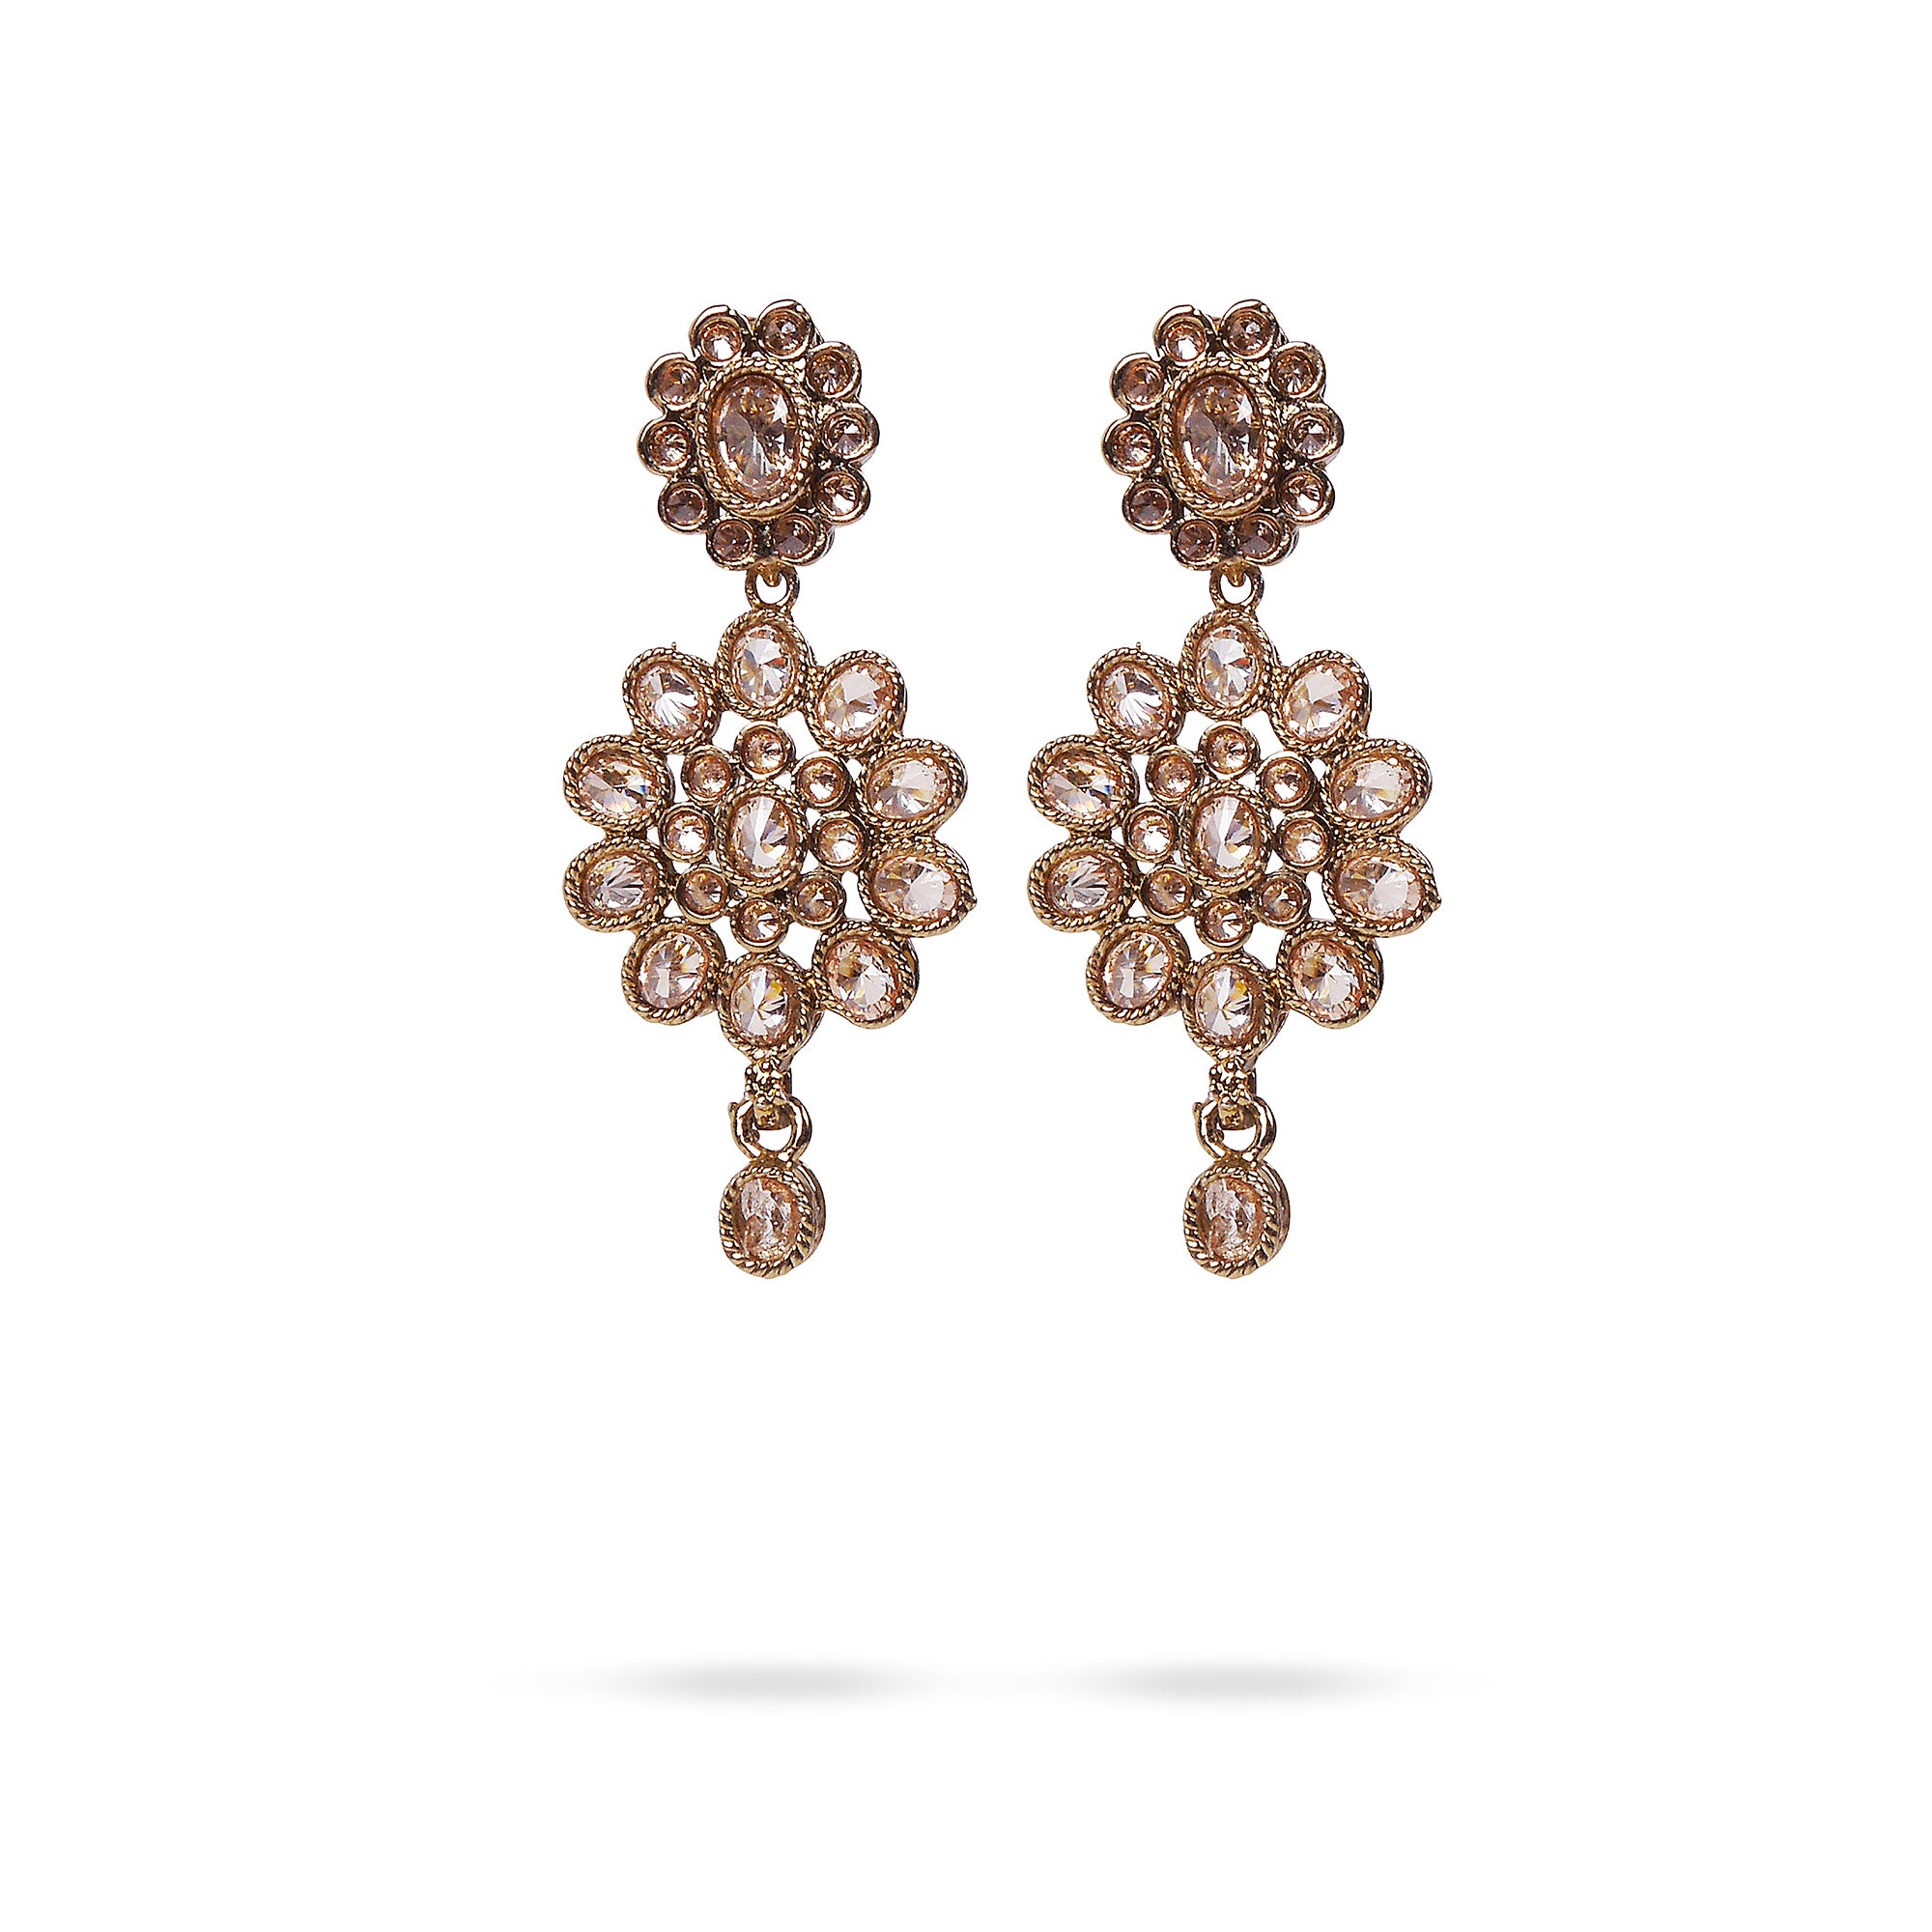 Floral Crystal Earrings in Antique Gold